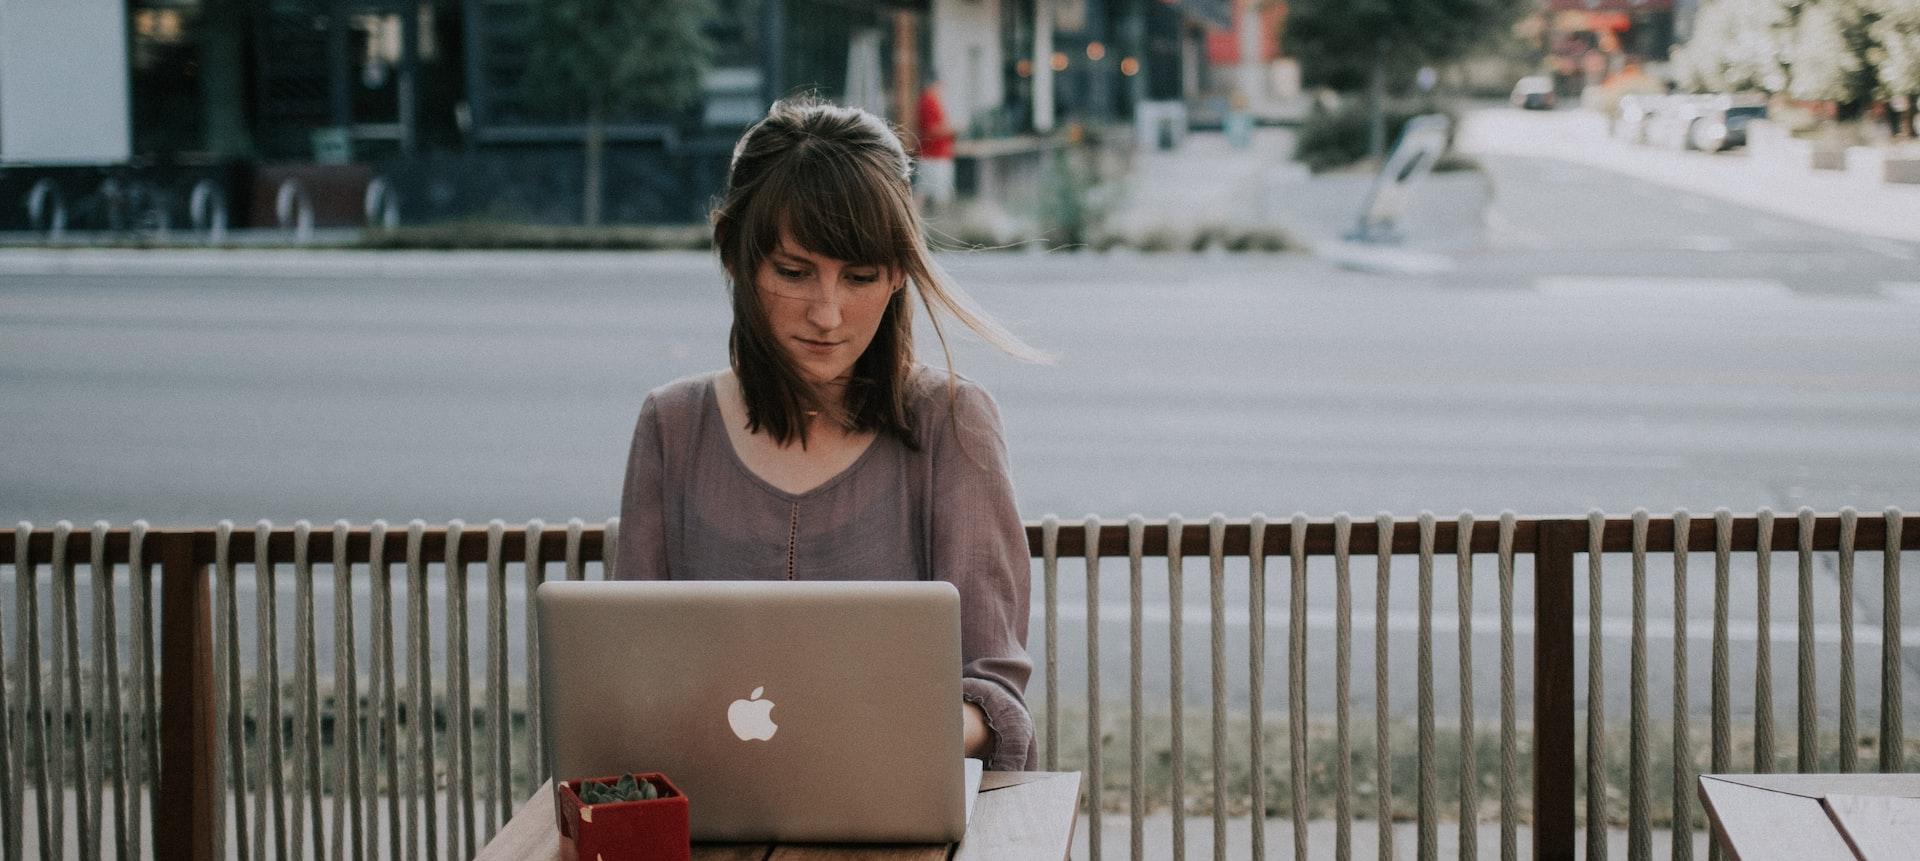 woman in gray shirt sitting on bench in front of MacBook